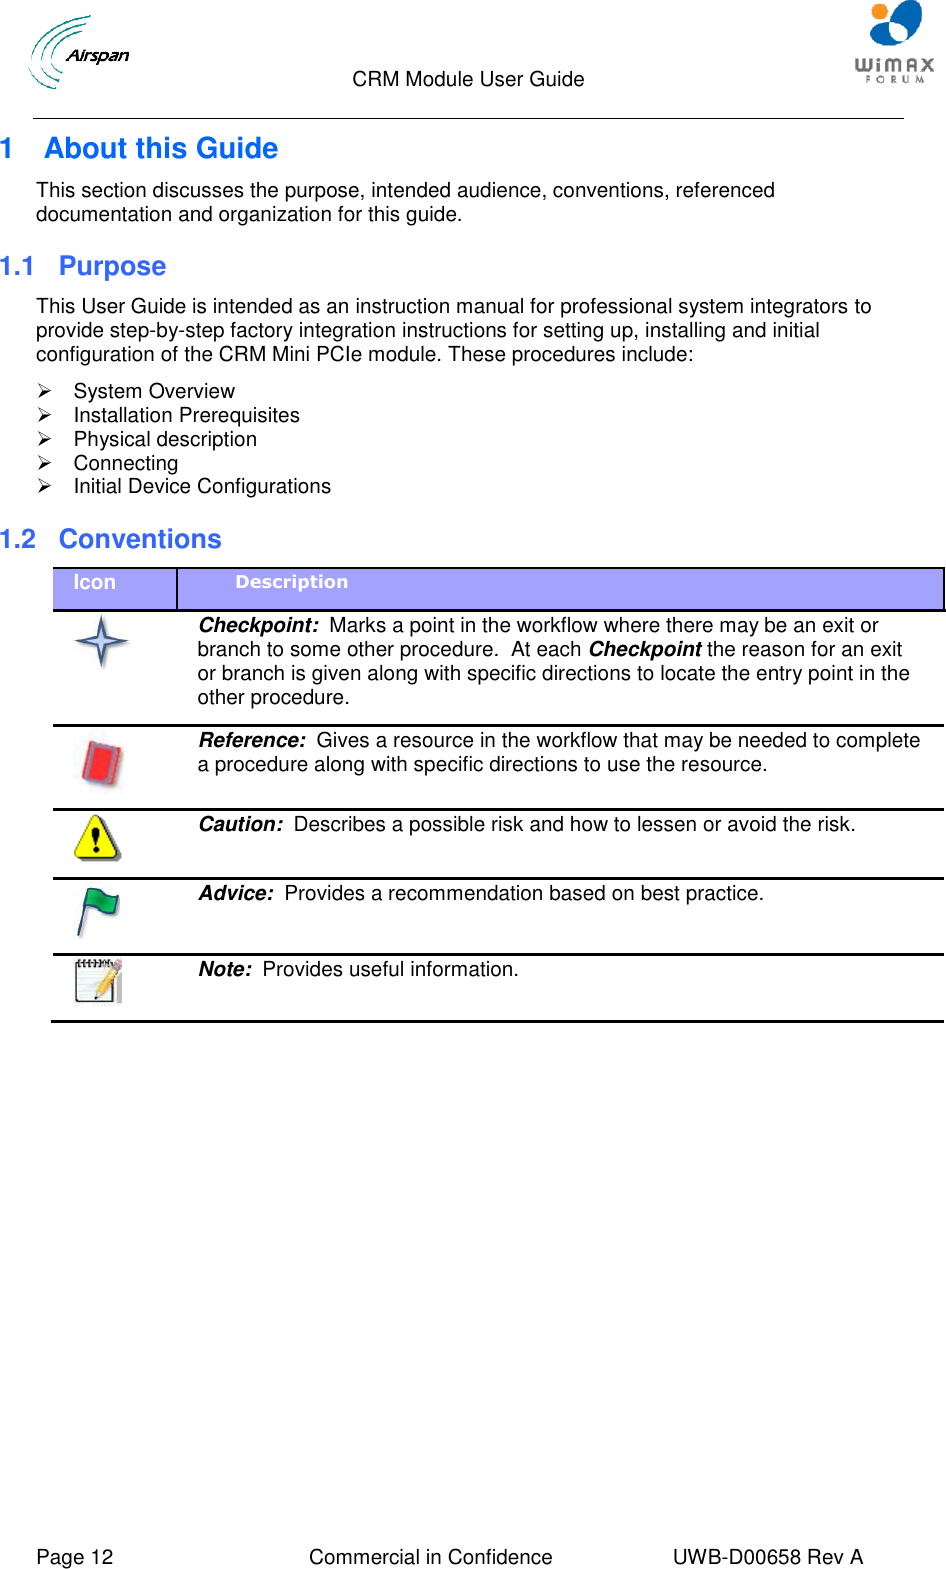                                  CRM Module User Guide     Page 12  Commercial in Confidence  UWB-D00658 Rev A    1  About this Guide This section discusses the purpose, intended audience, conventions, referenced documentation and organization for this guide. 1.1 Purpose This User Guide is intended as an instruction manual for professional system integrators to provide step-by-step factory integration instructions for setting up, installing and initial configuration of the CRM Mini PCIe module. These procedures include:   System Overview   Installation Prerequisites   Physical description   Connecting   Initial Device Configurations 1.2  Conventions Icon Description   Checkpoint:  Marks a point in the workflow where there may be an exit or branch to some other procedure.  At each Checkpoint the reason for an exit or branch is given along with specific directions to locate the entry point in the other procedure.  Reference:  Gives a resource in the workflow that may be needed to complete a procedure along with specific directions to use the resource.  Caution:  Describes a possible risk and how to lessen or avoid the risk.  Advice:  Provides a recommendation based on best practice.  Note:  Provides useful information.  